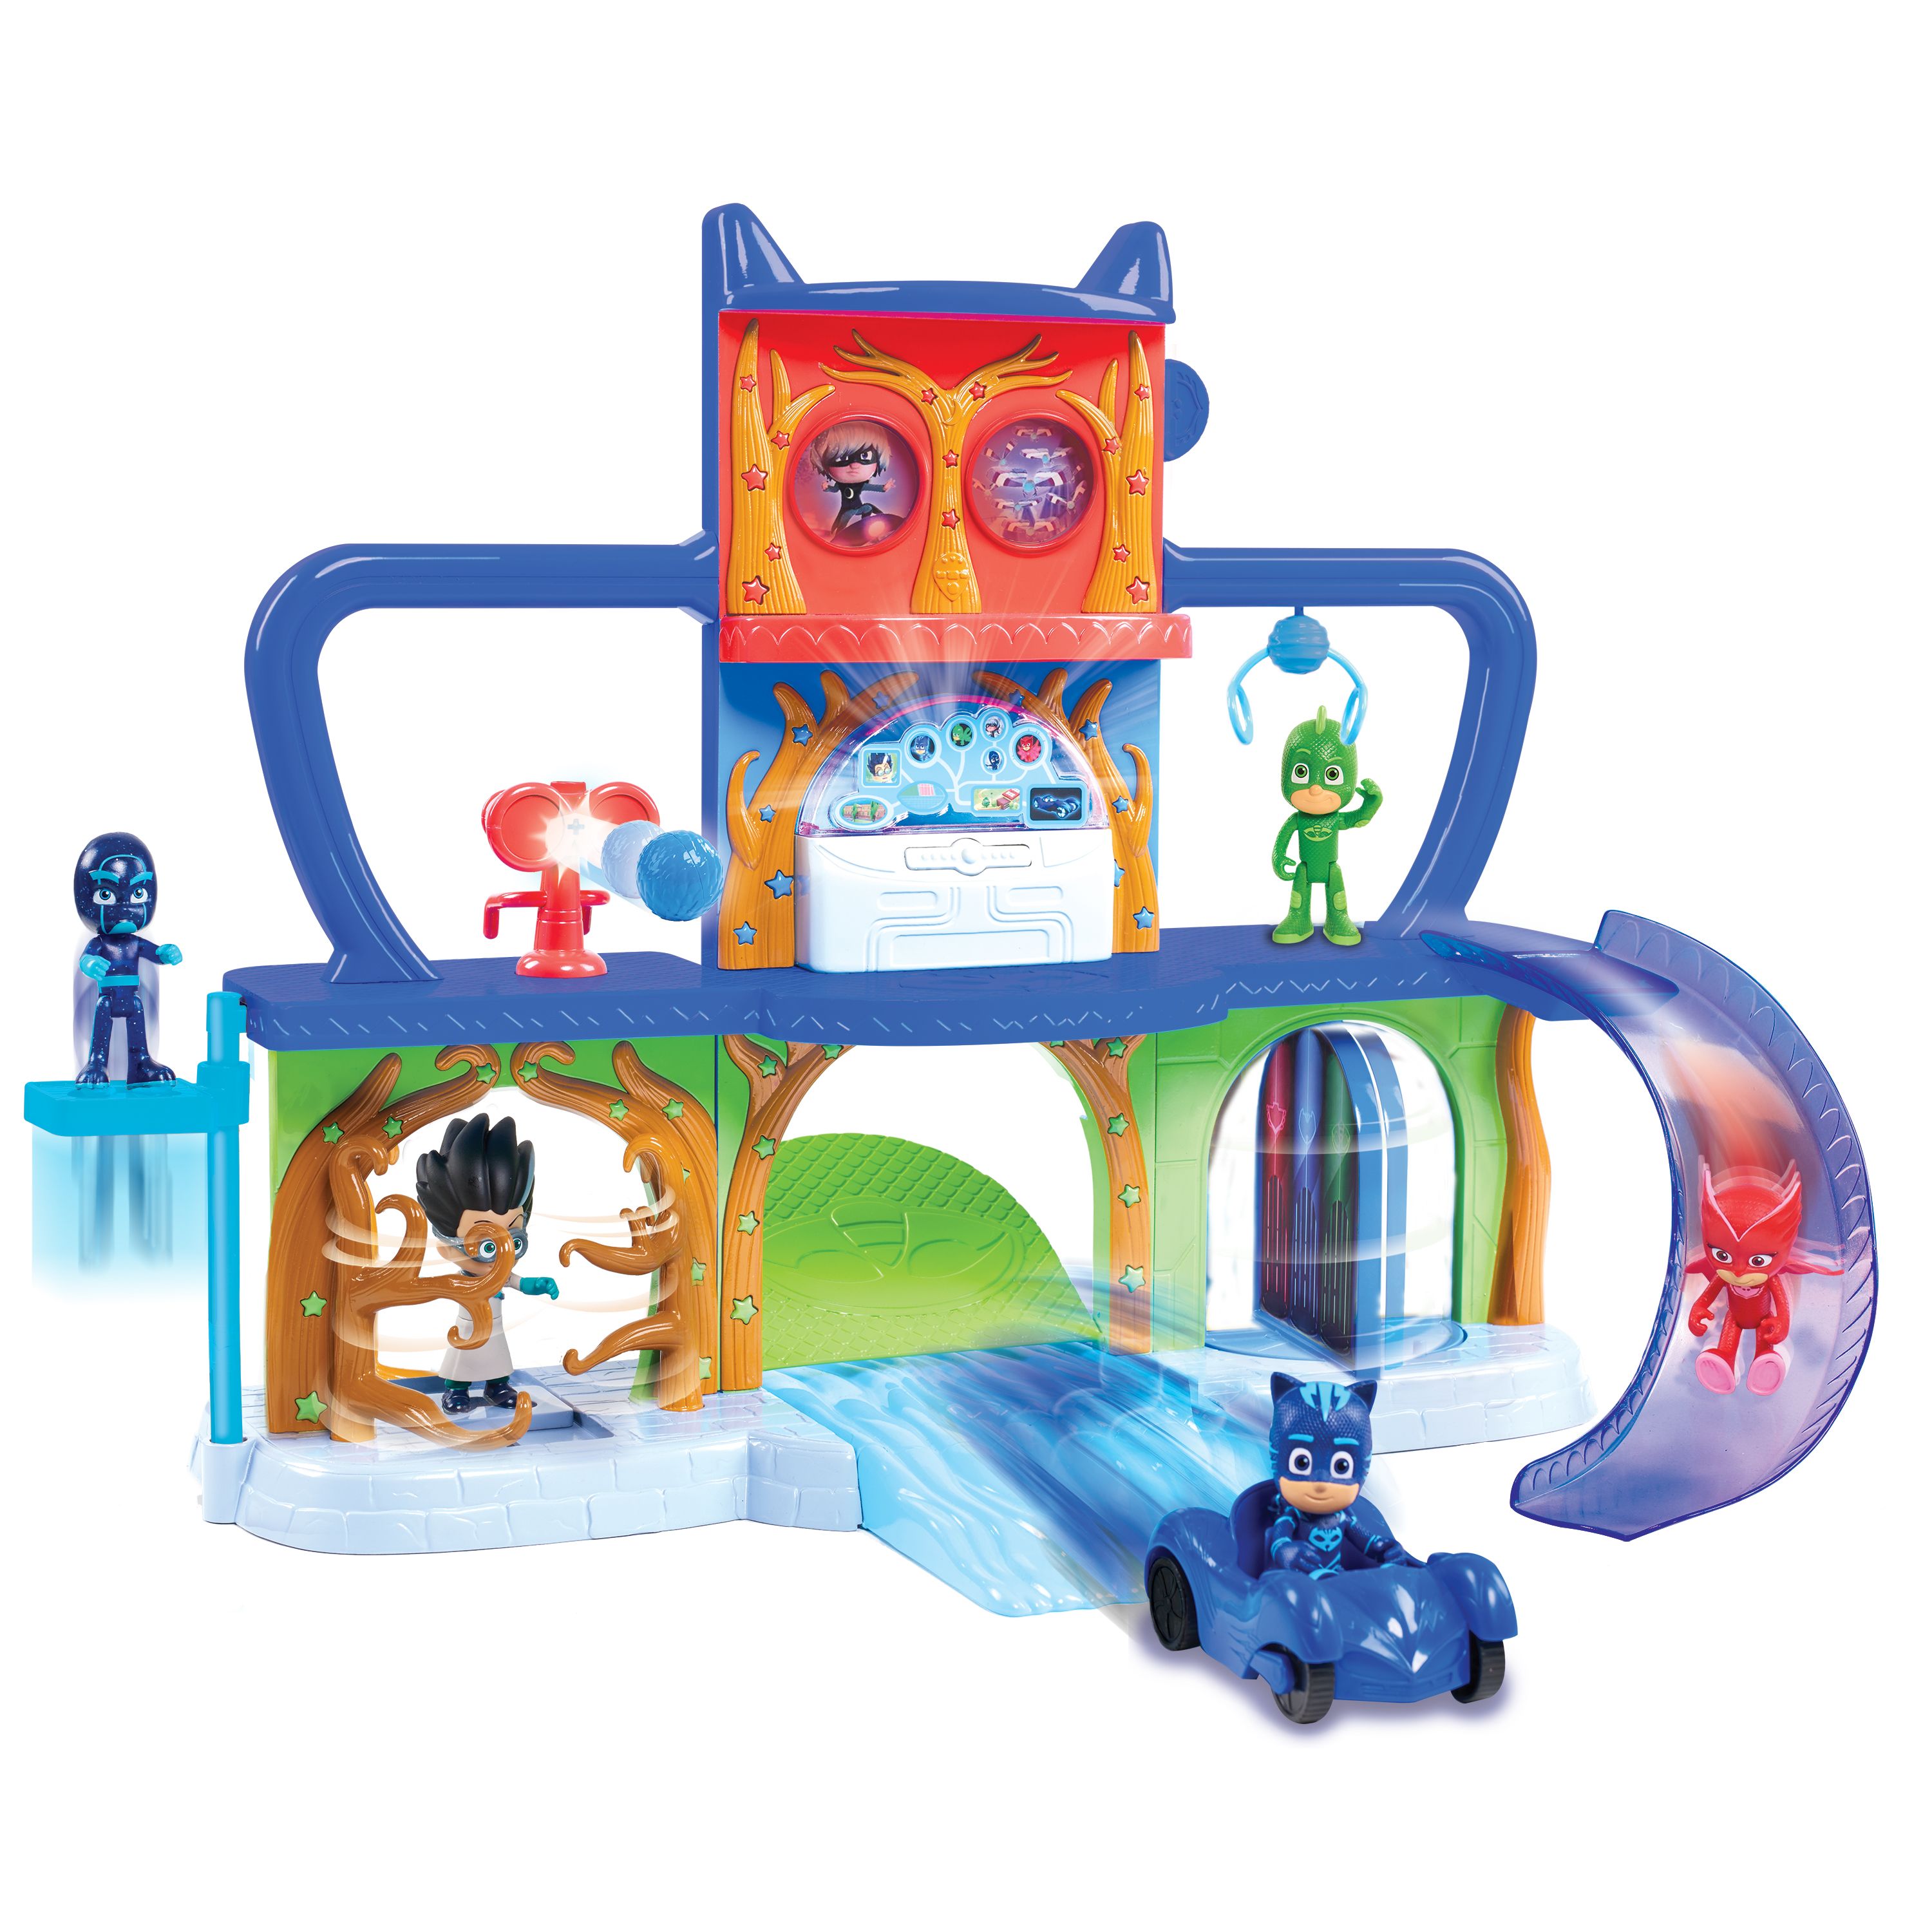 PJ Masks Headquarters Playset, with 3" Catboy Figure - Walmart Exclusive - image 1 of 6